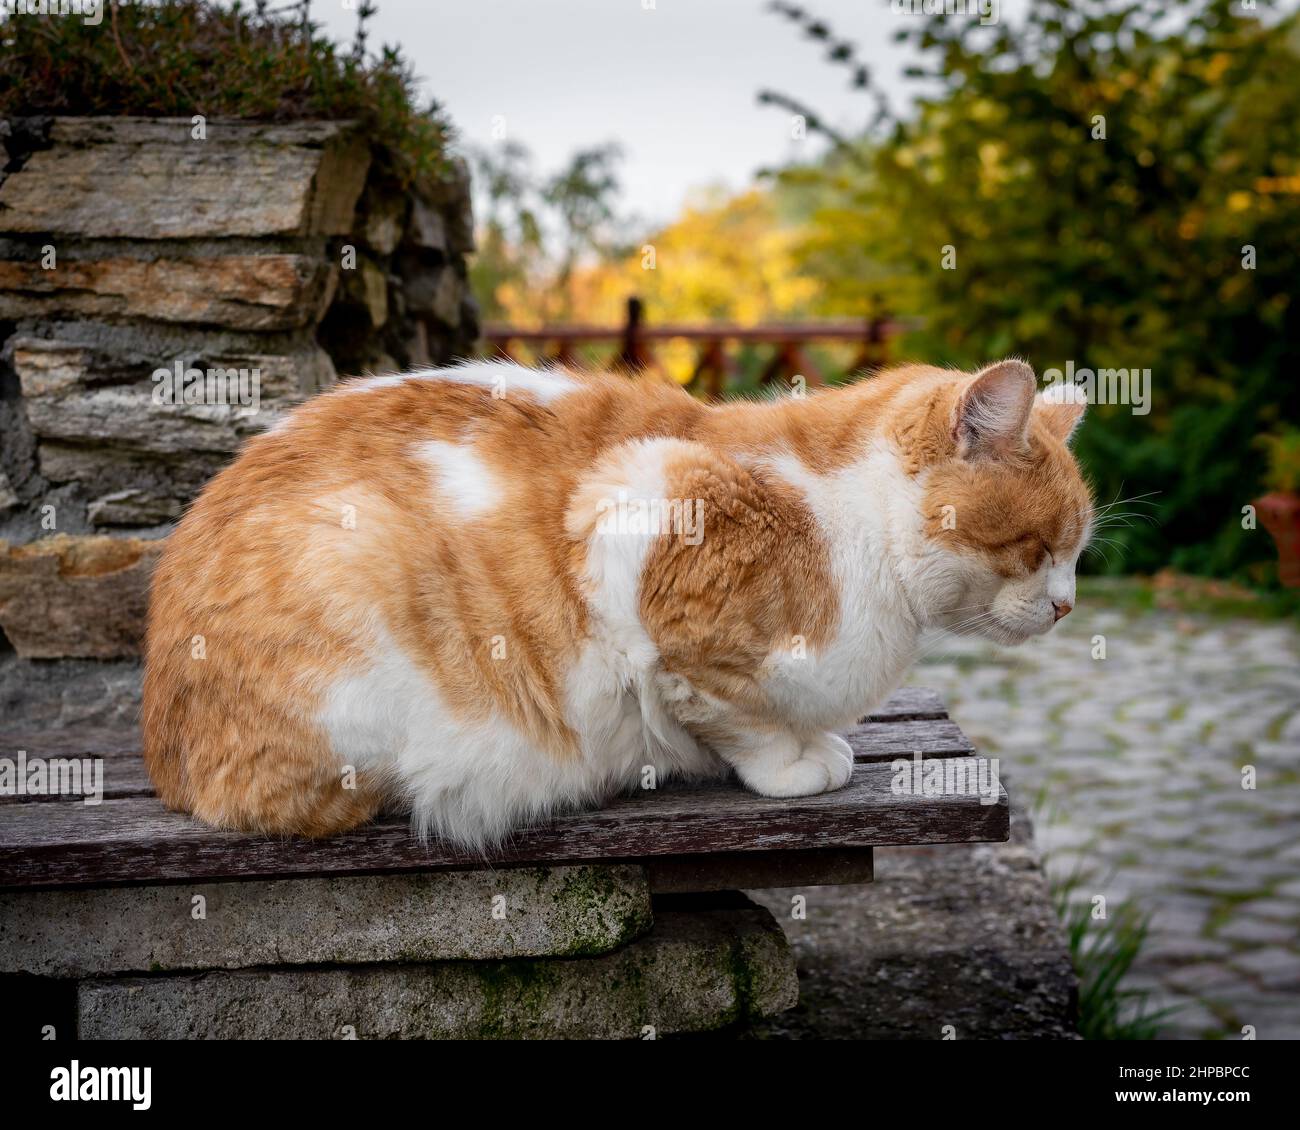 Ginger cat napping on a bench, stray cat meditating Stock Photo